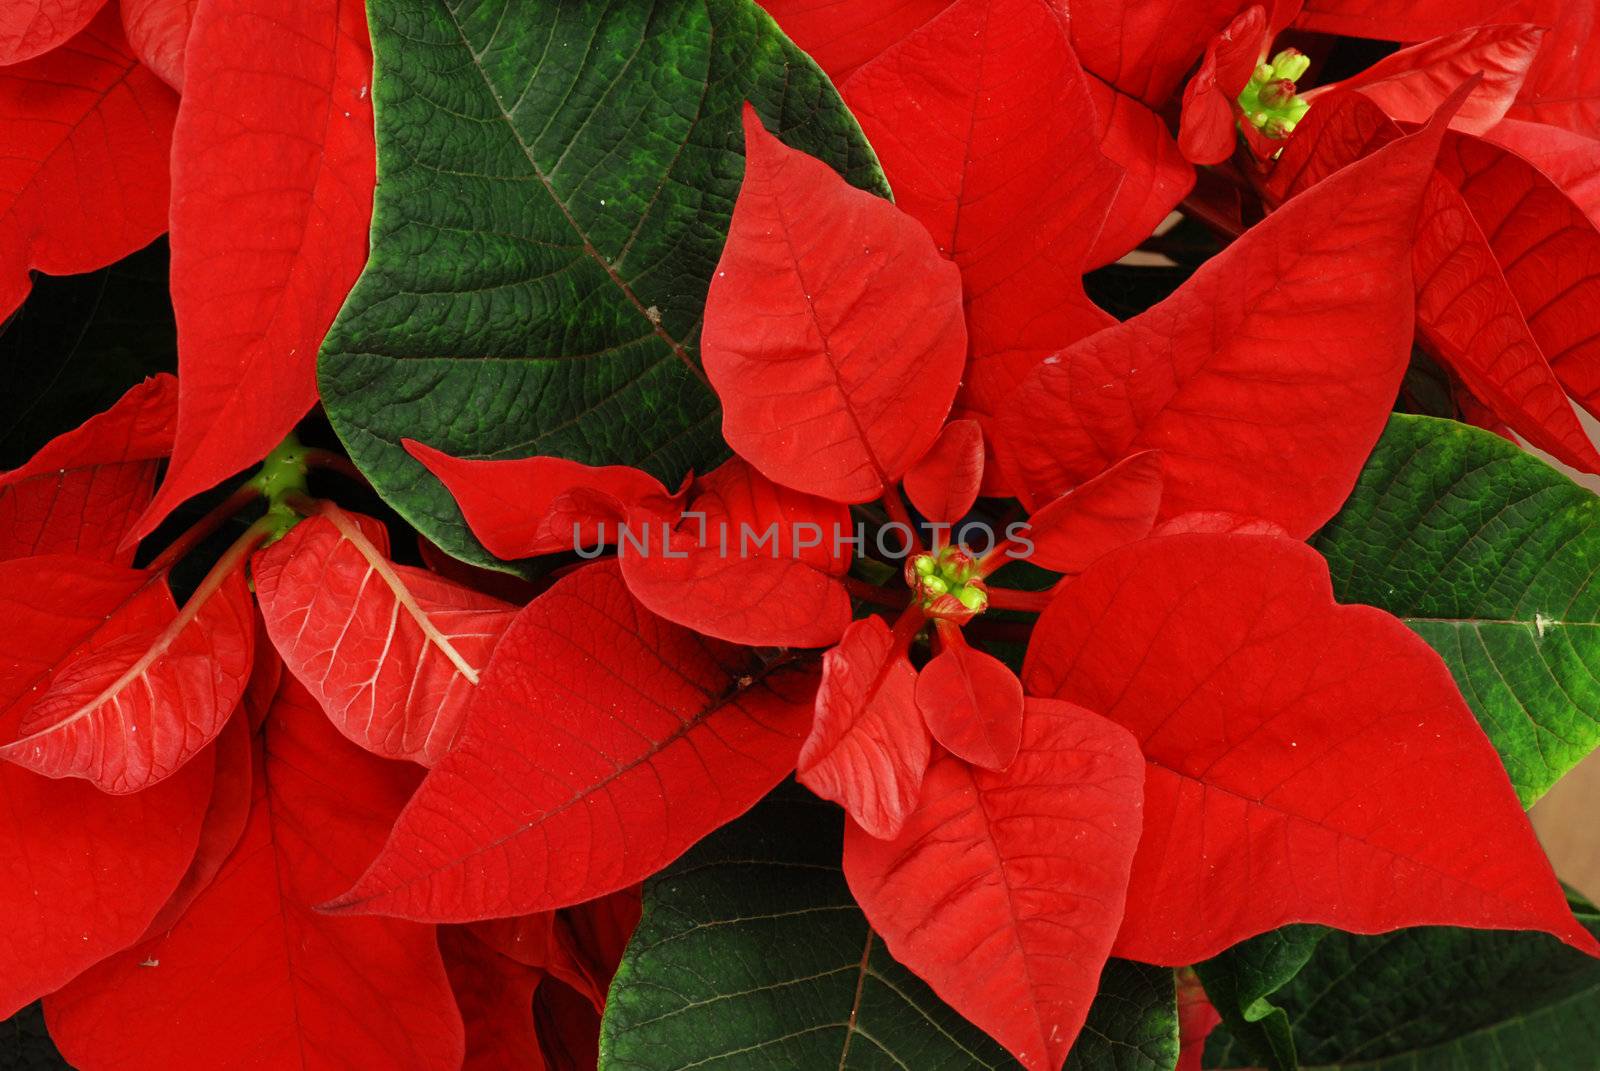 Red Poinsettia with green leaves - christmas flower